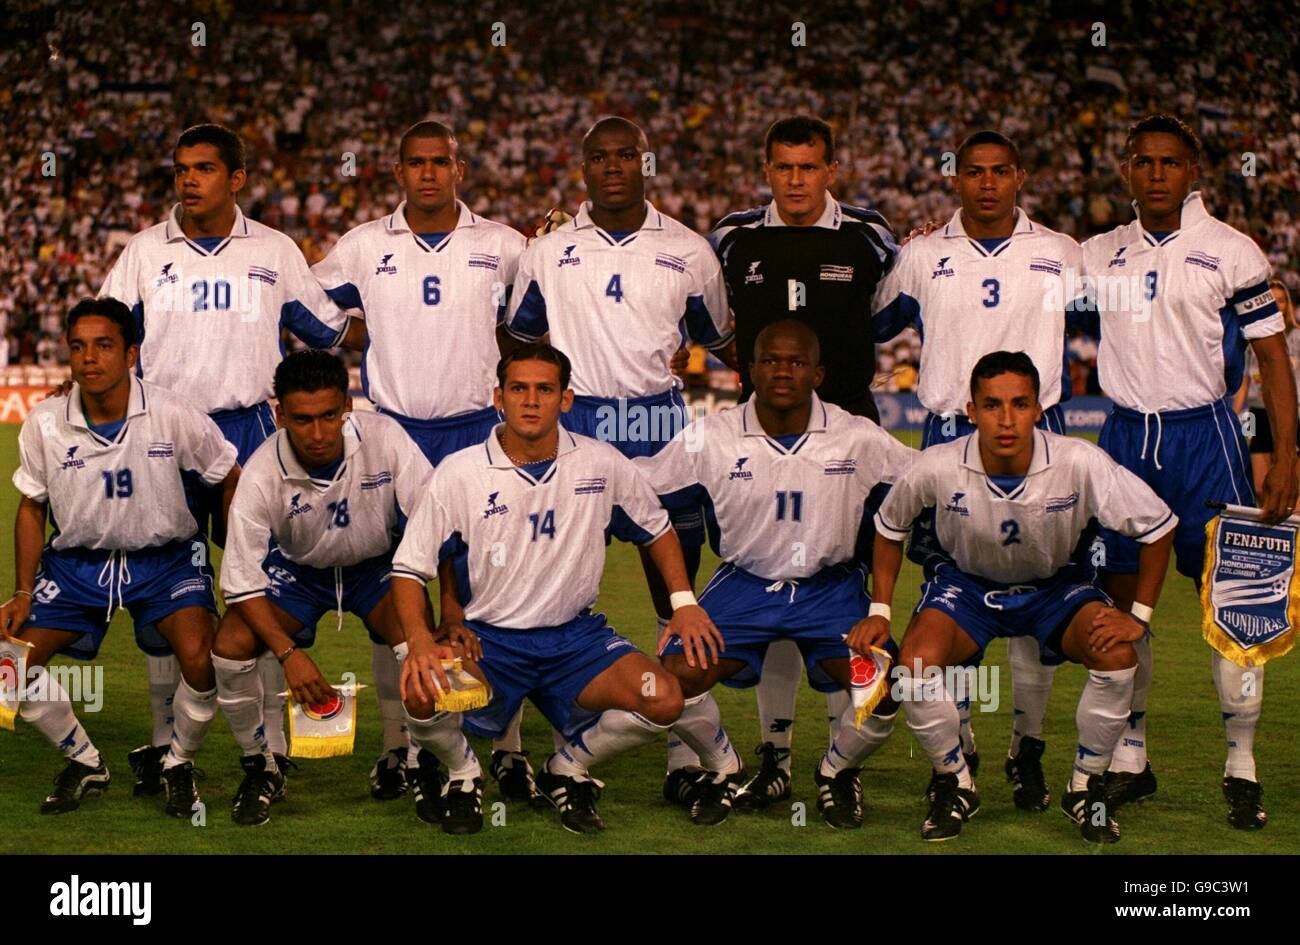 Soccer - CONCACAF Gold Cup 2000 - Group A - Honduras v Colombia. Honduras team group Stock Photo